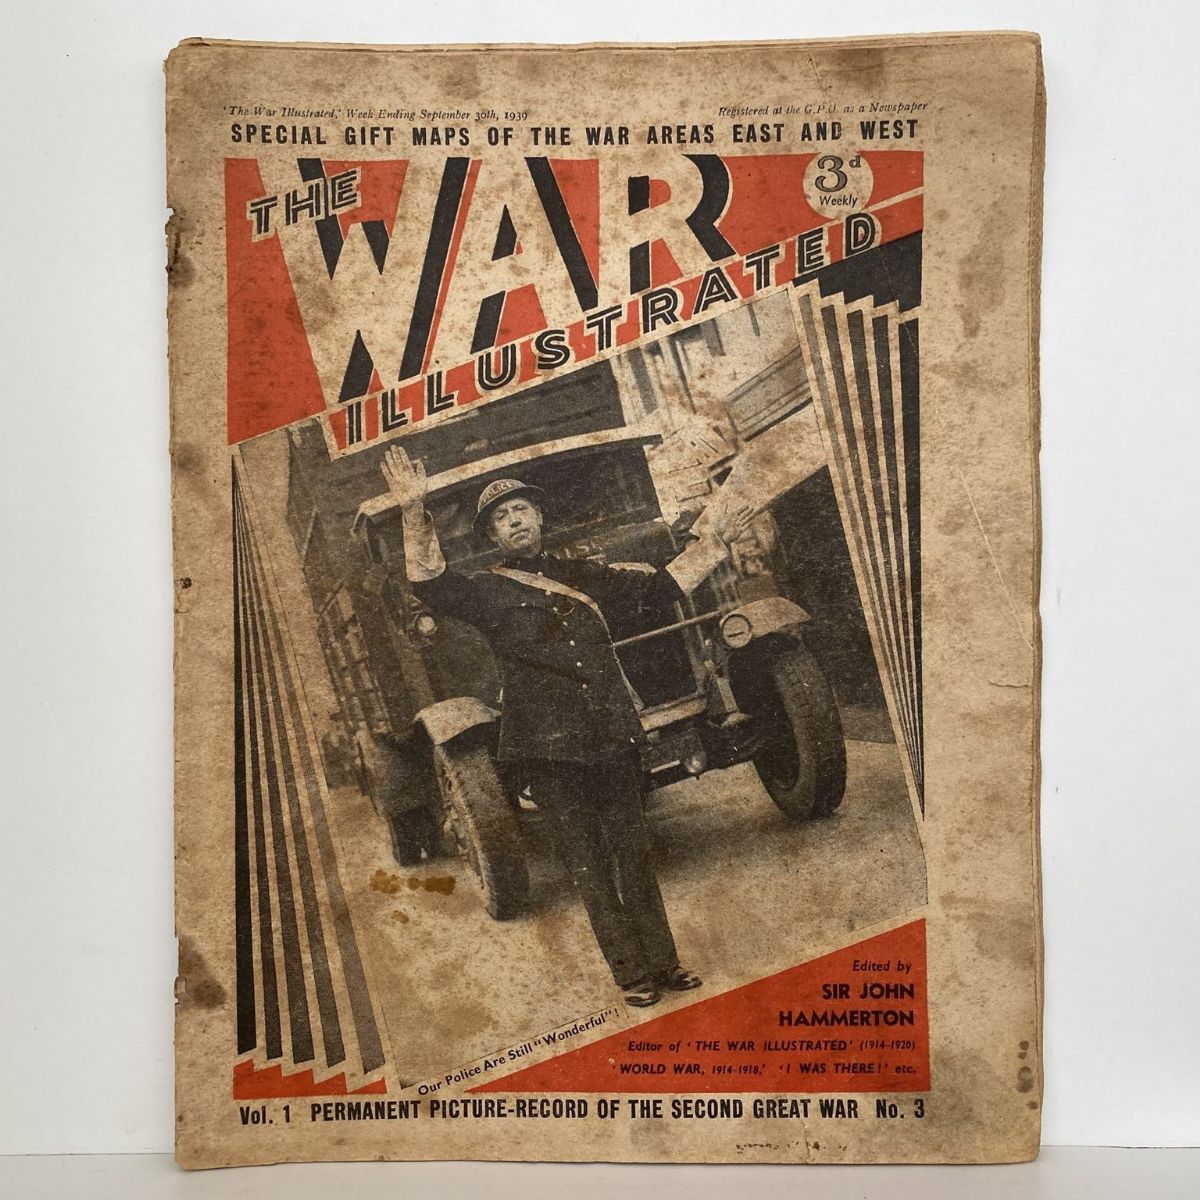 THE WAR ILLUSTRATED - Vol 1, No 3, 30th Sept 1939